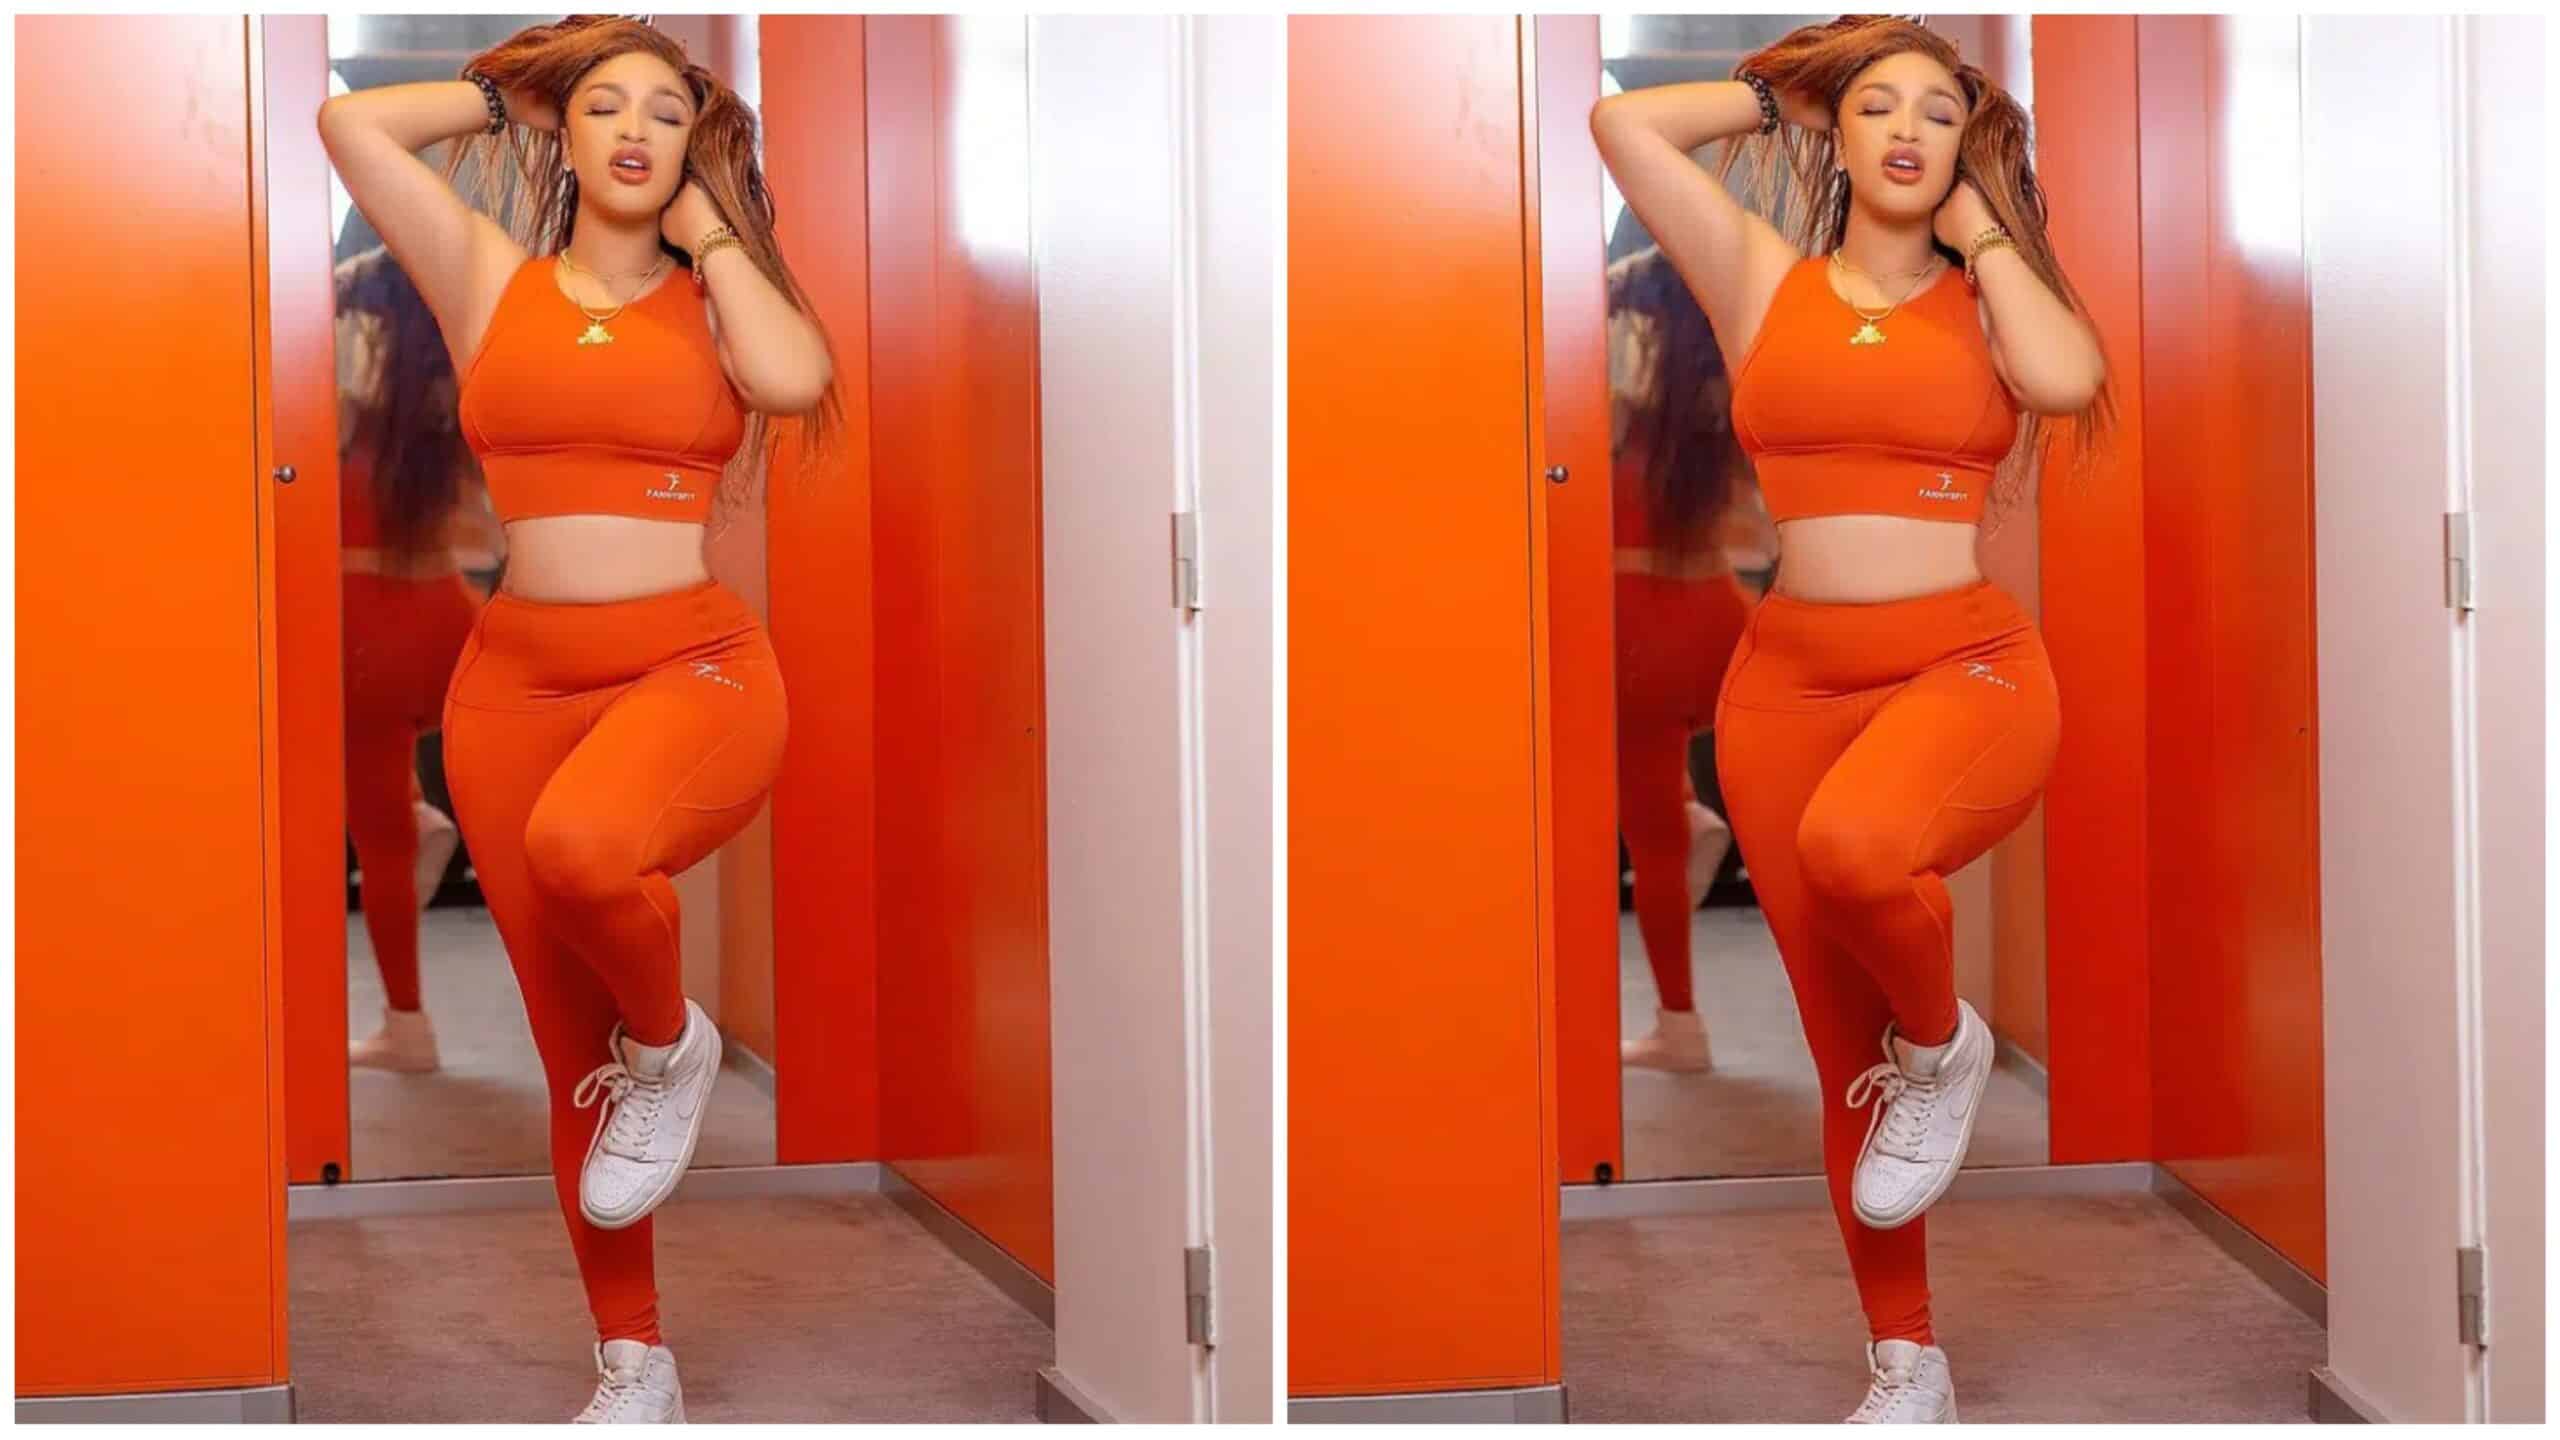 Even if you see it, you can’t touch it” – Tonto Dikeh breaks silence following unusual somersault